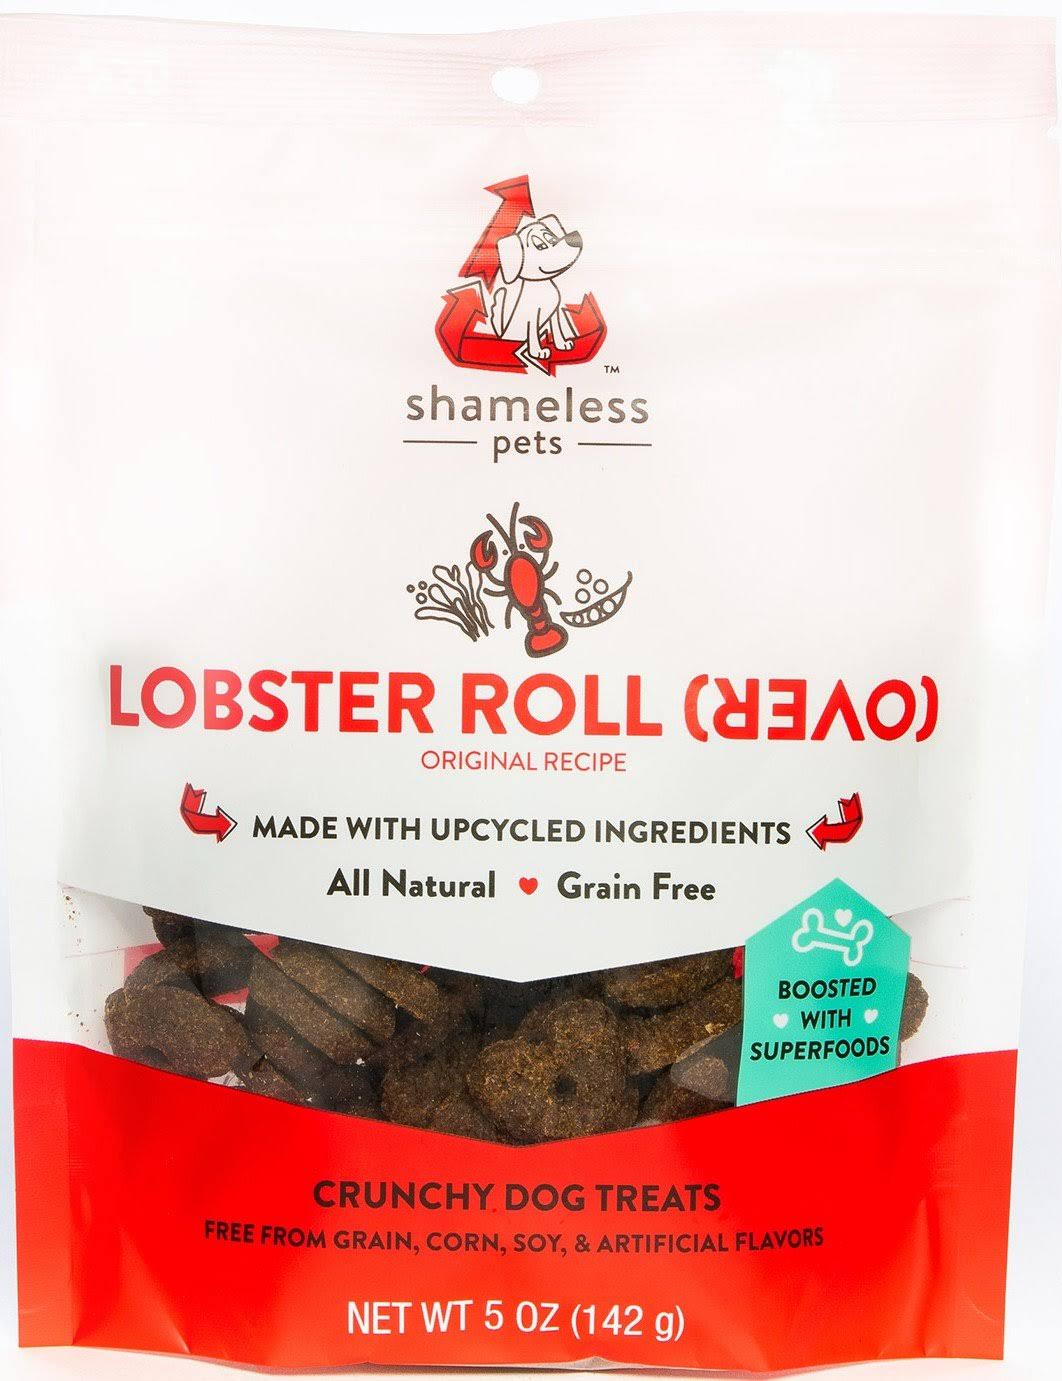 SHAMELESS PETS Natural Grain Free Dog Treats | Made in The USA from